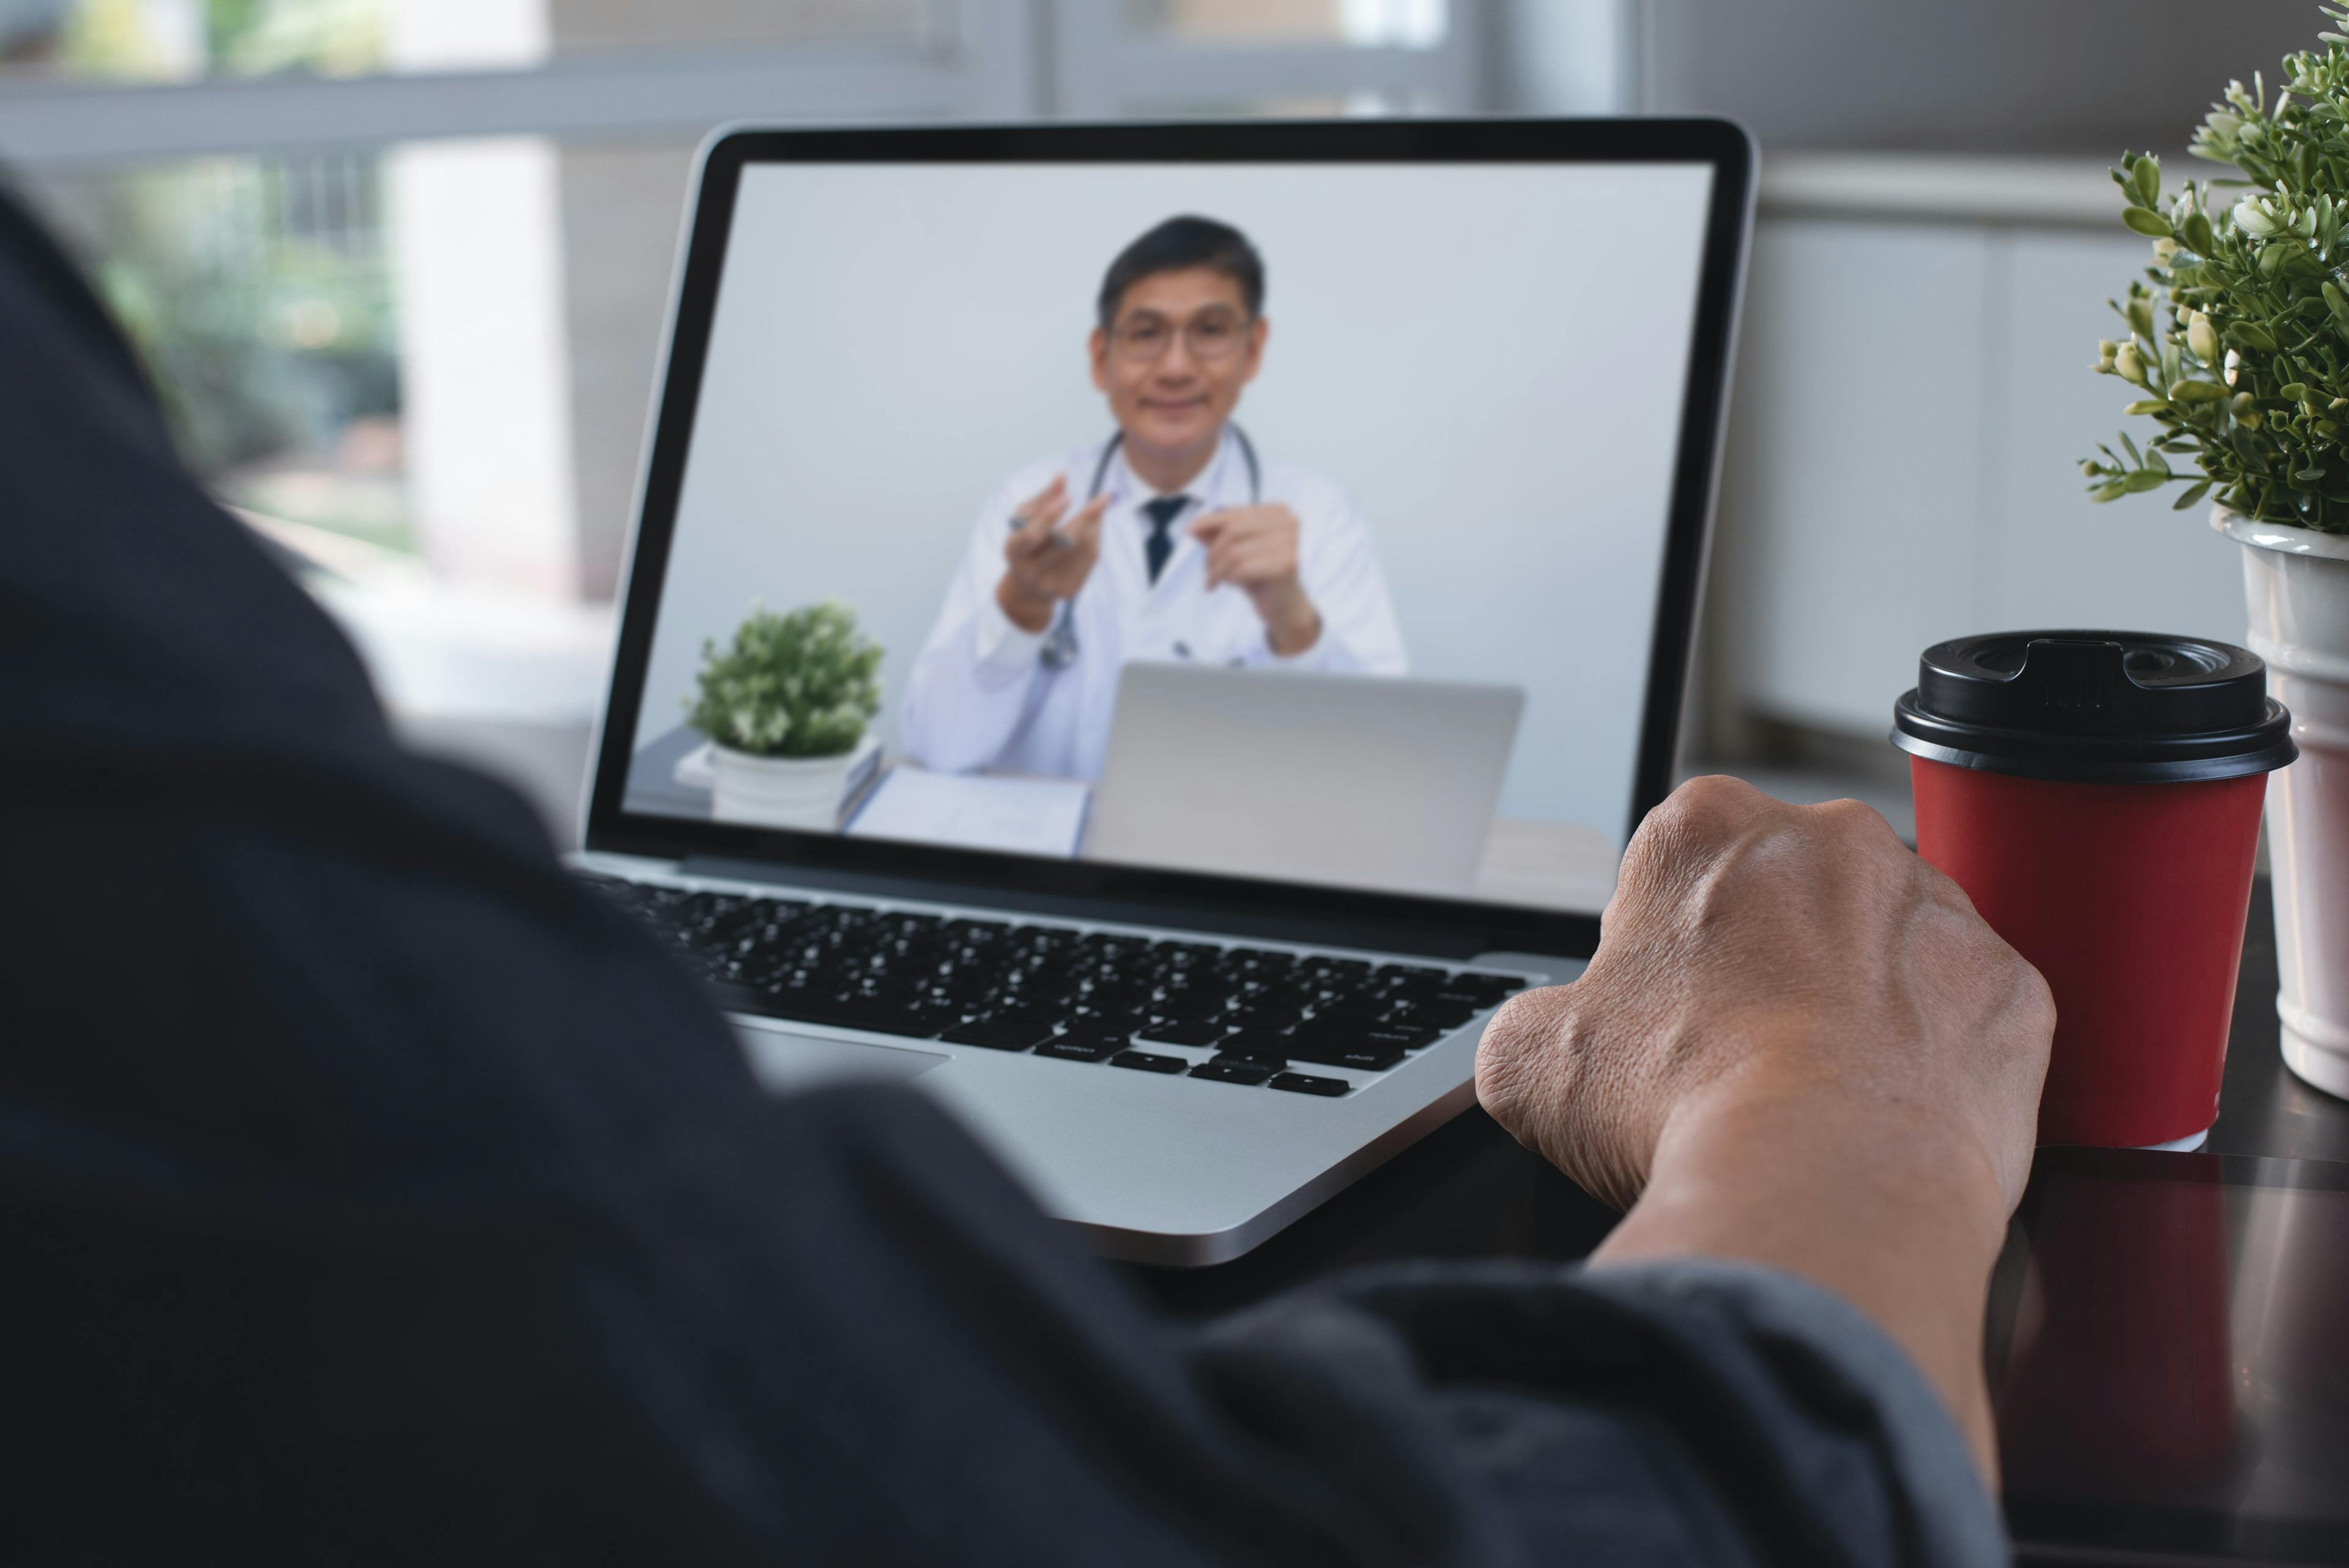 Patients want more digital options such as online scheduling and telehealth, Andrea Kowalski writes. (Image credit: ©Tippapatt - stock.adobe.com)